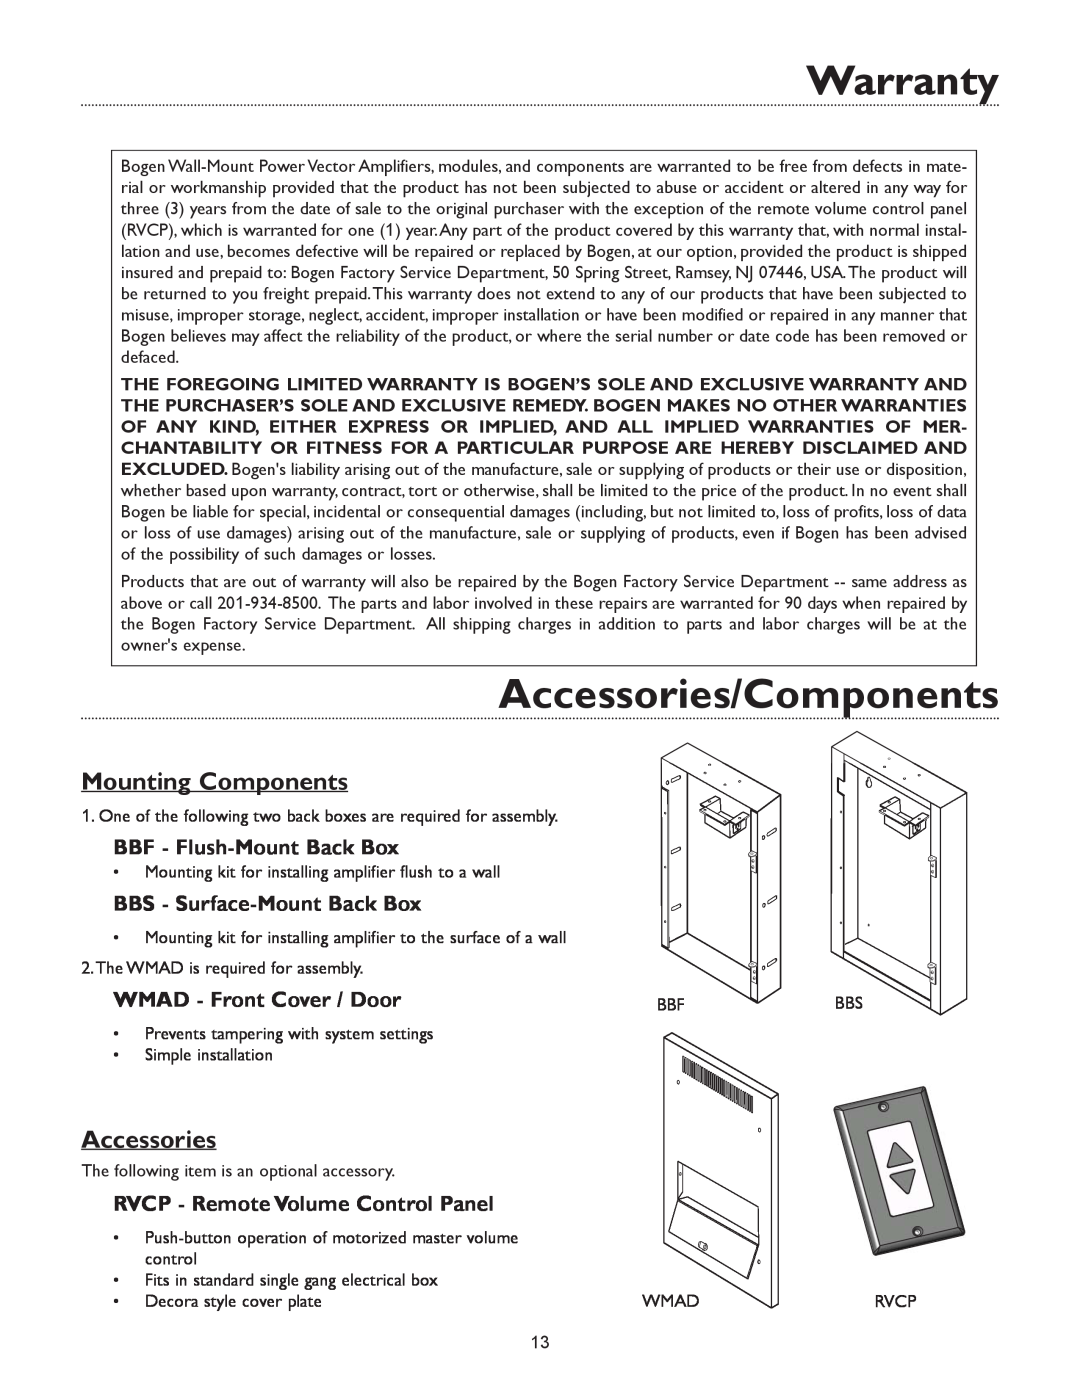 Bogen & WV250 Warranty, Accessories/Components, Mounting Components, BBF - Flush-MountBack Box, WMAD - Front Cover / Door 